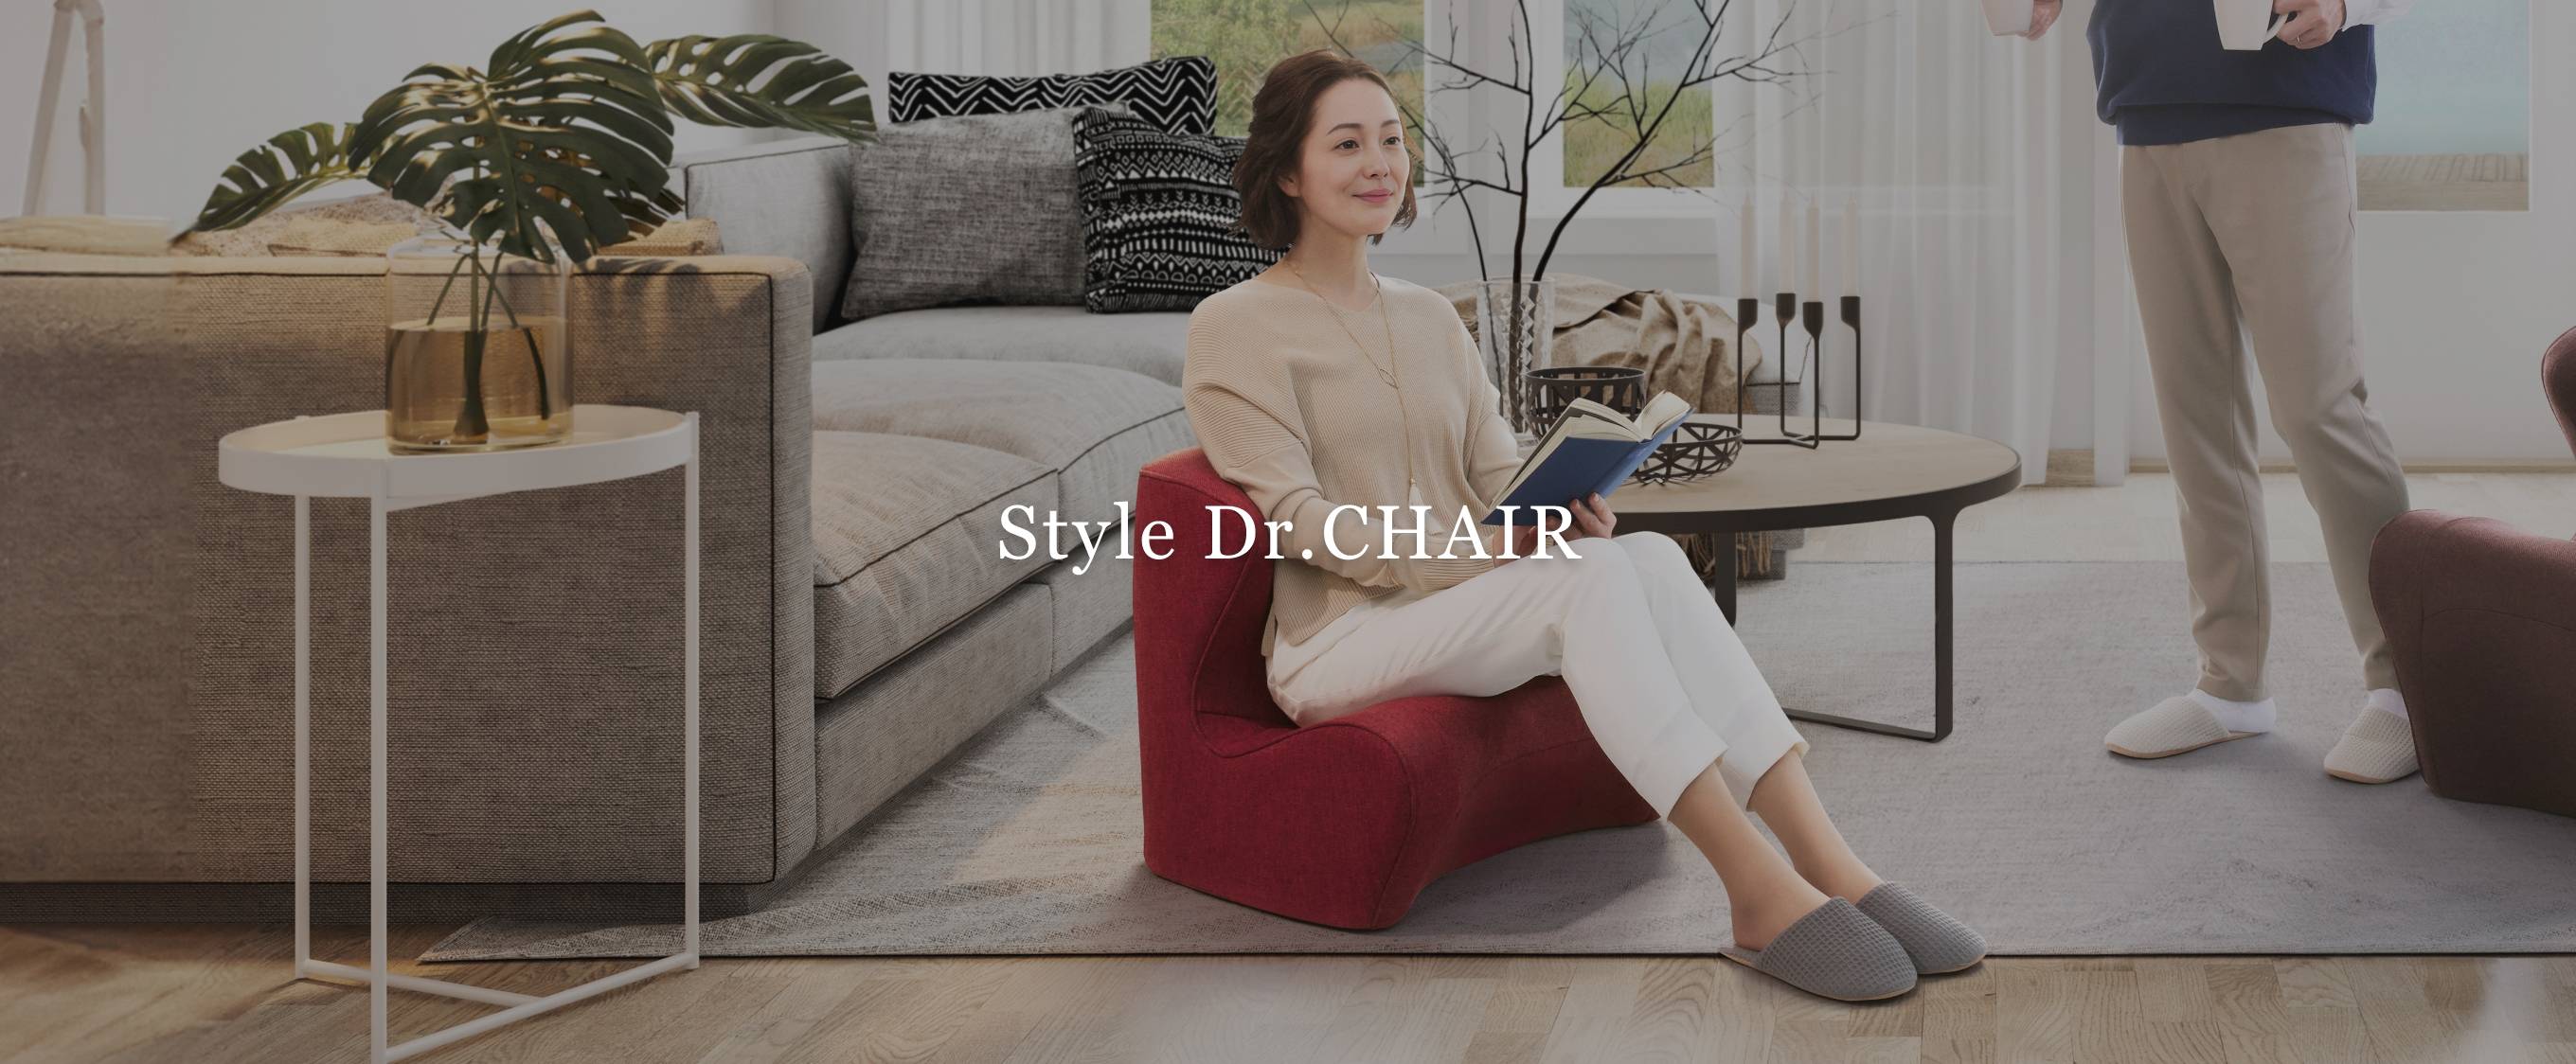 Style Dr.CHAIR（スタイルドクターチェア） | Style | BRANDS 